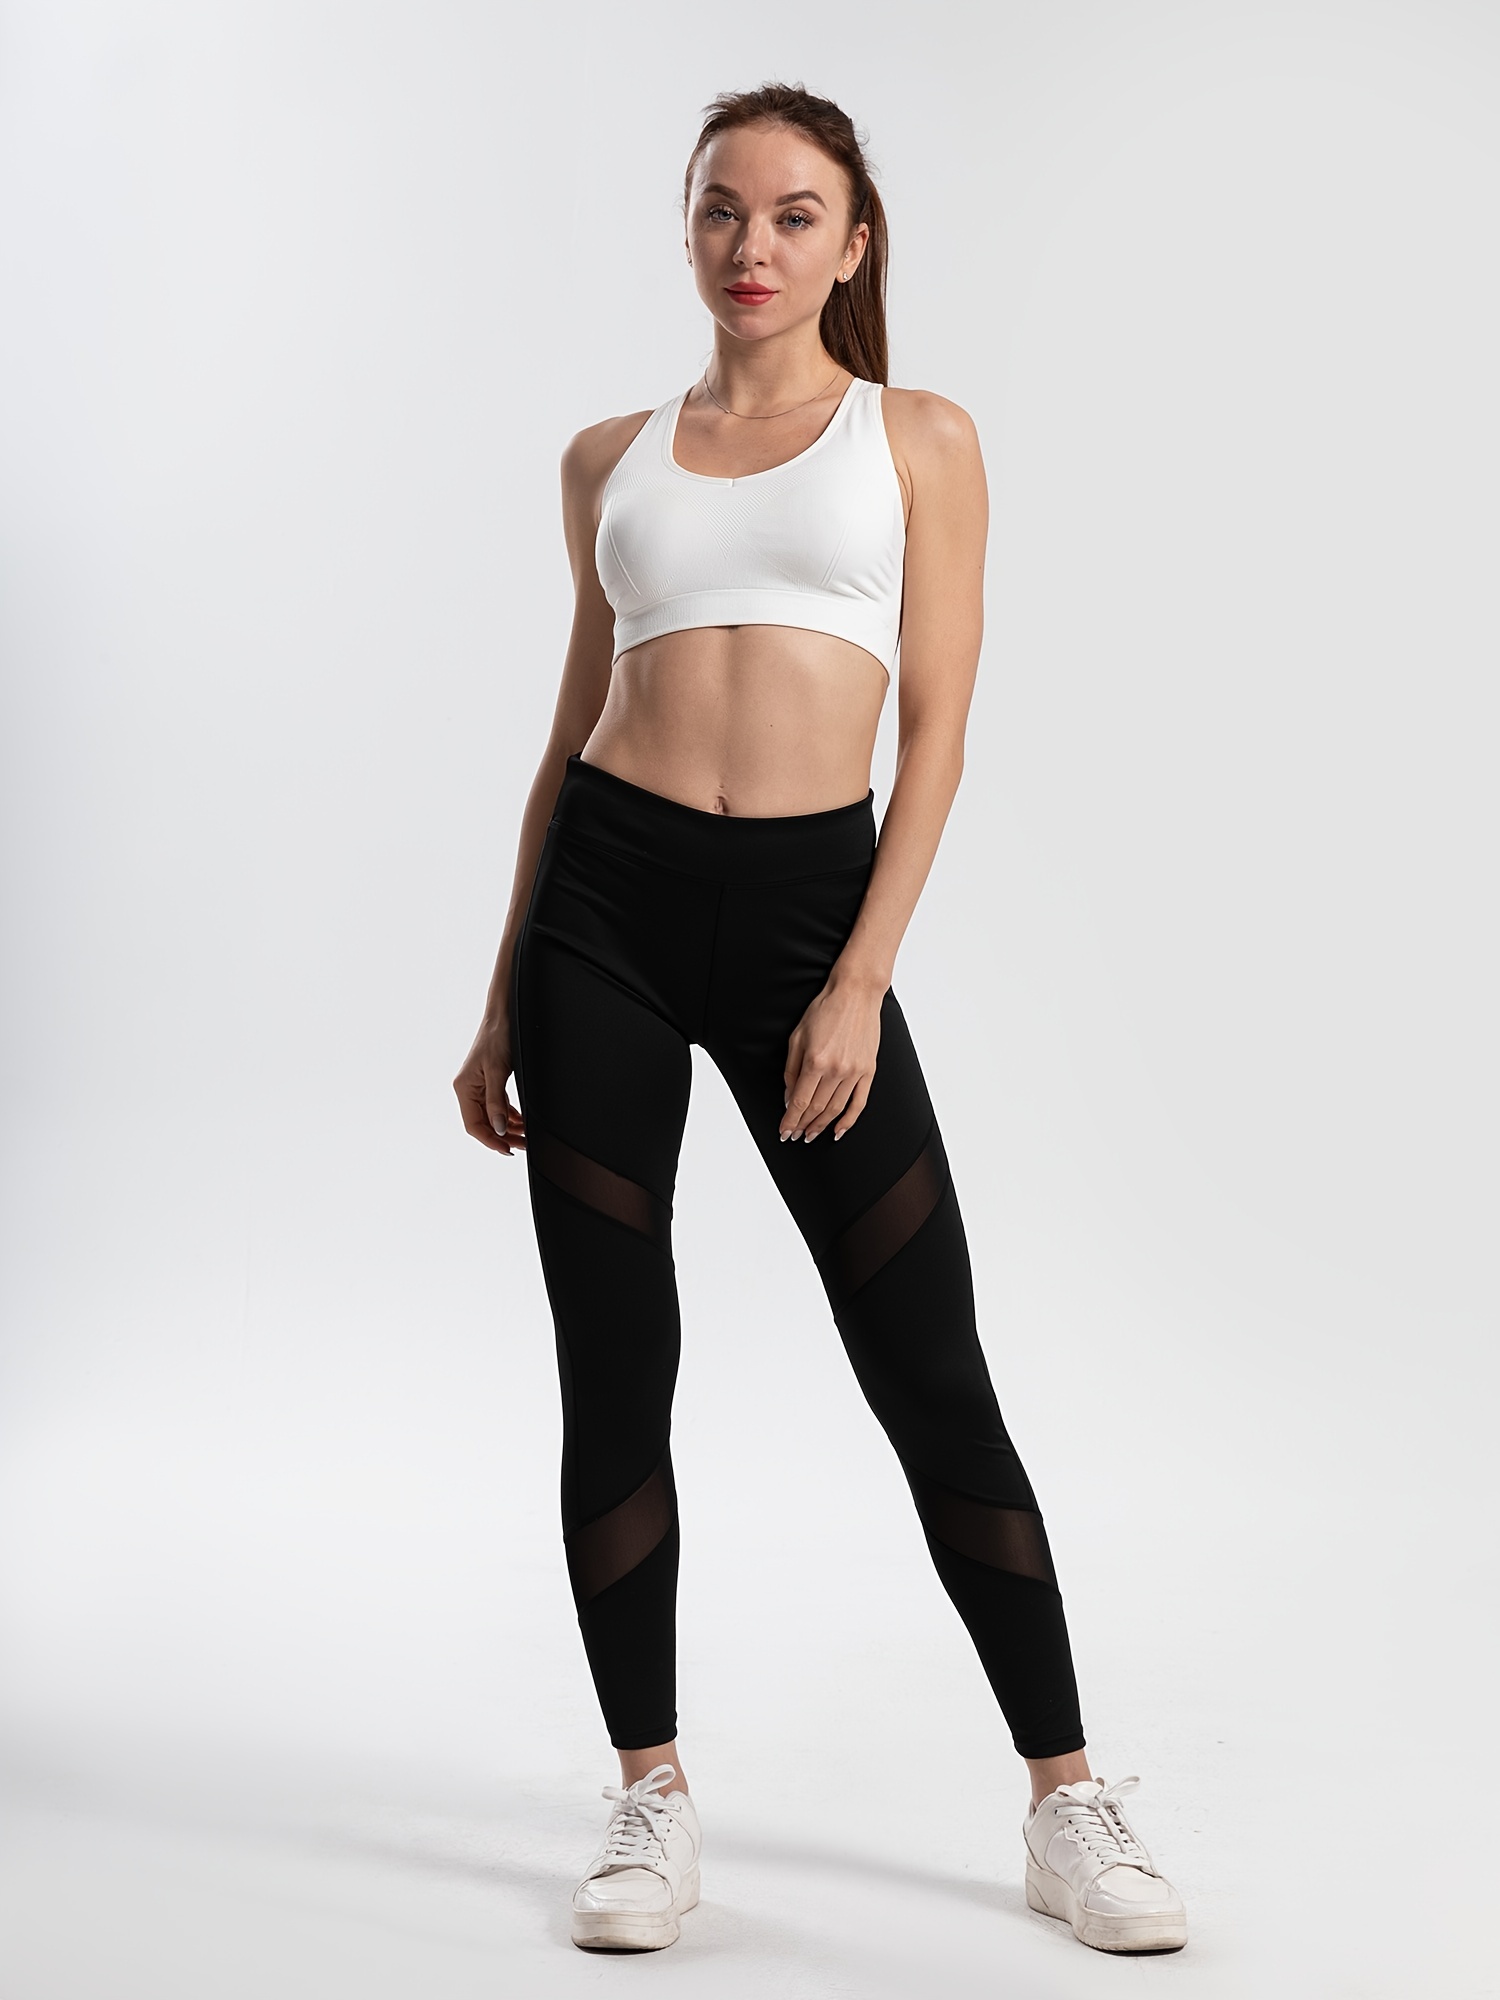 Women's Activewear: Mesh Stitching Yoga Leggings - High Waist Stretchy  Workout Fitness Leggings for Yoga Pants